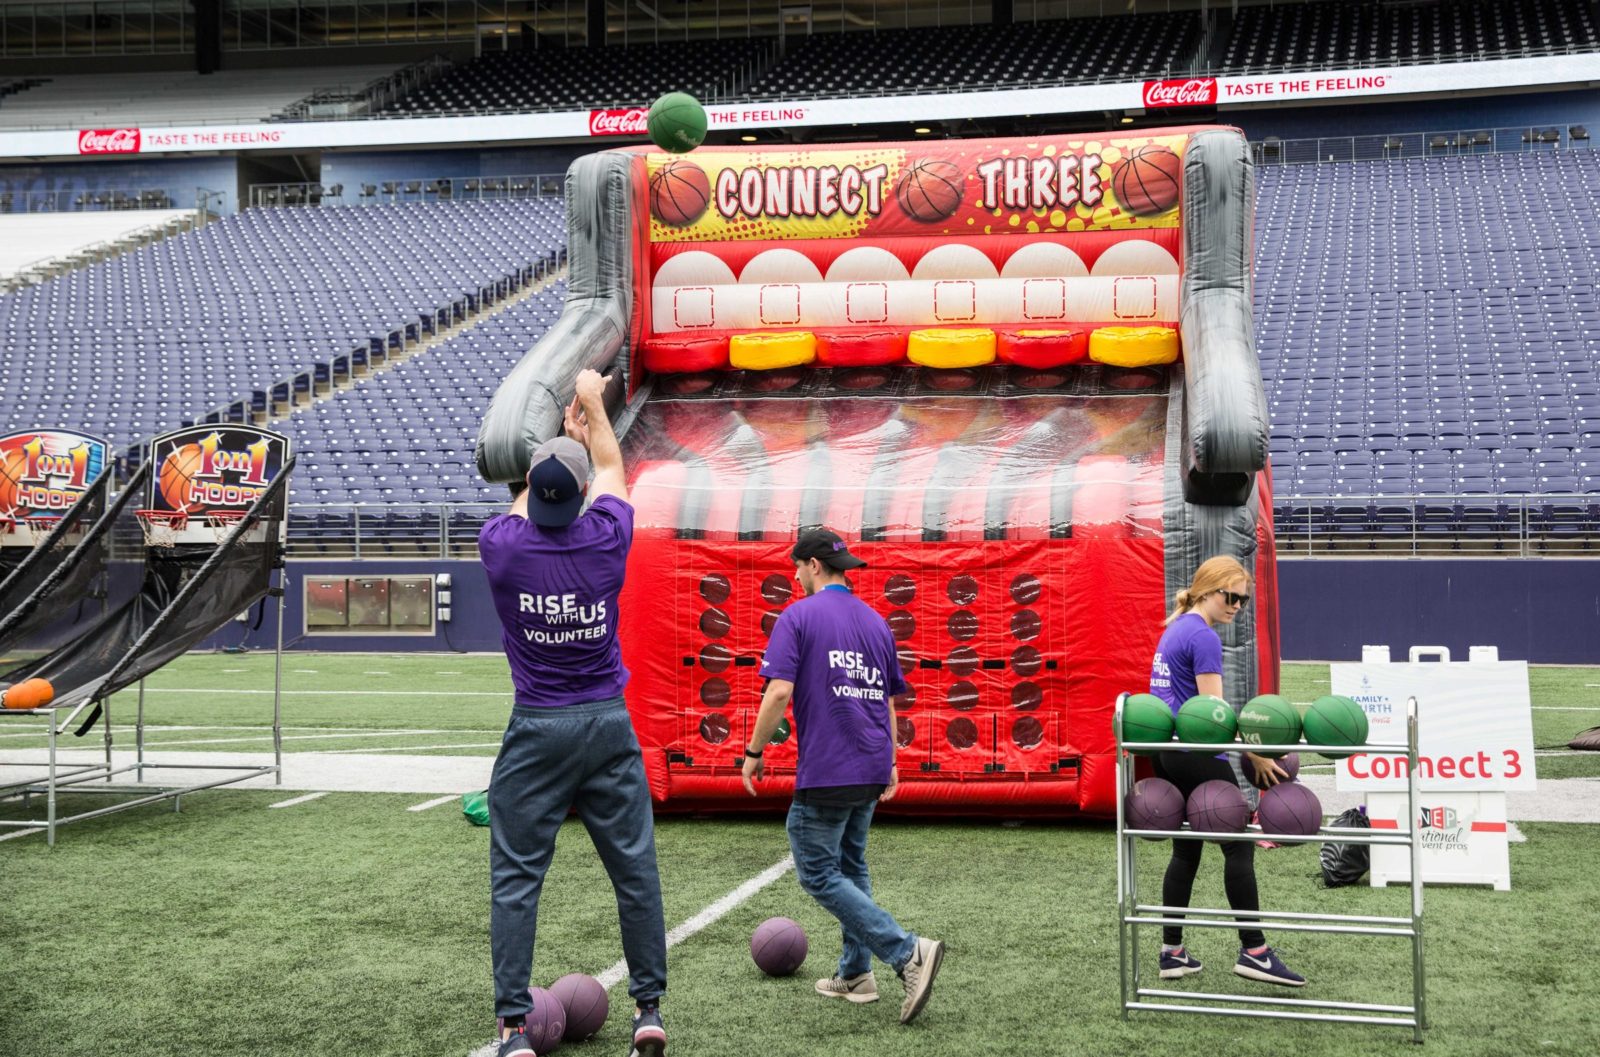 Giant Games for Parties 